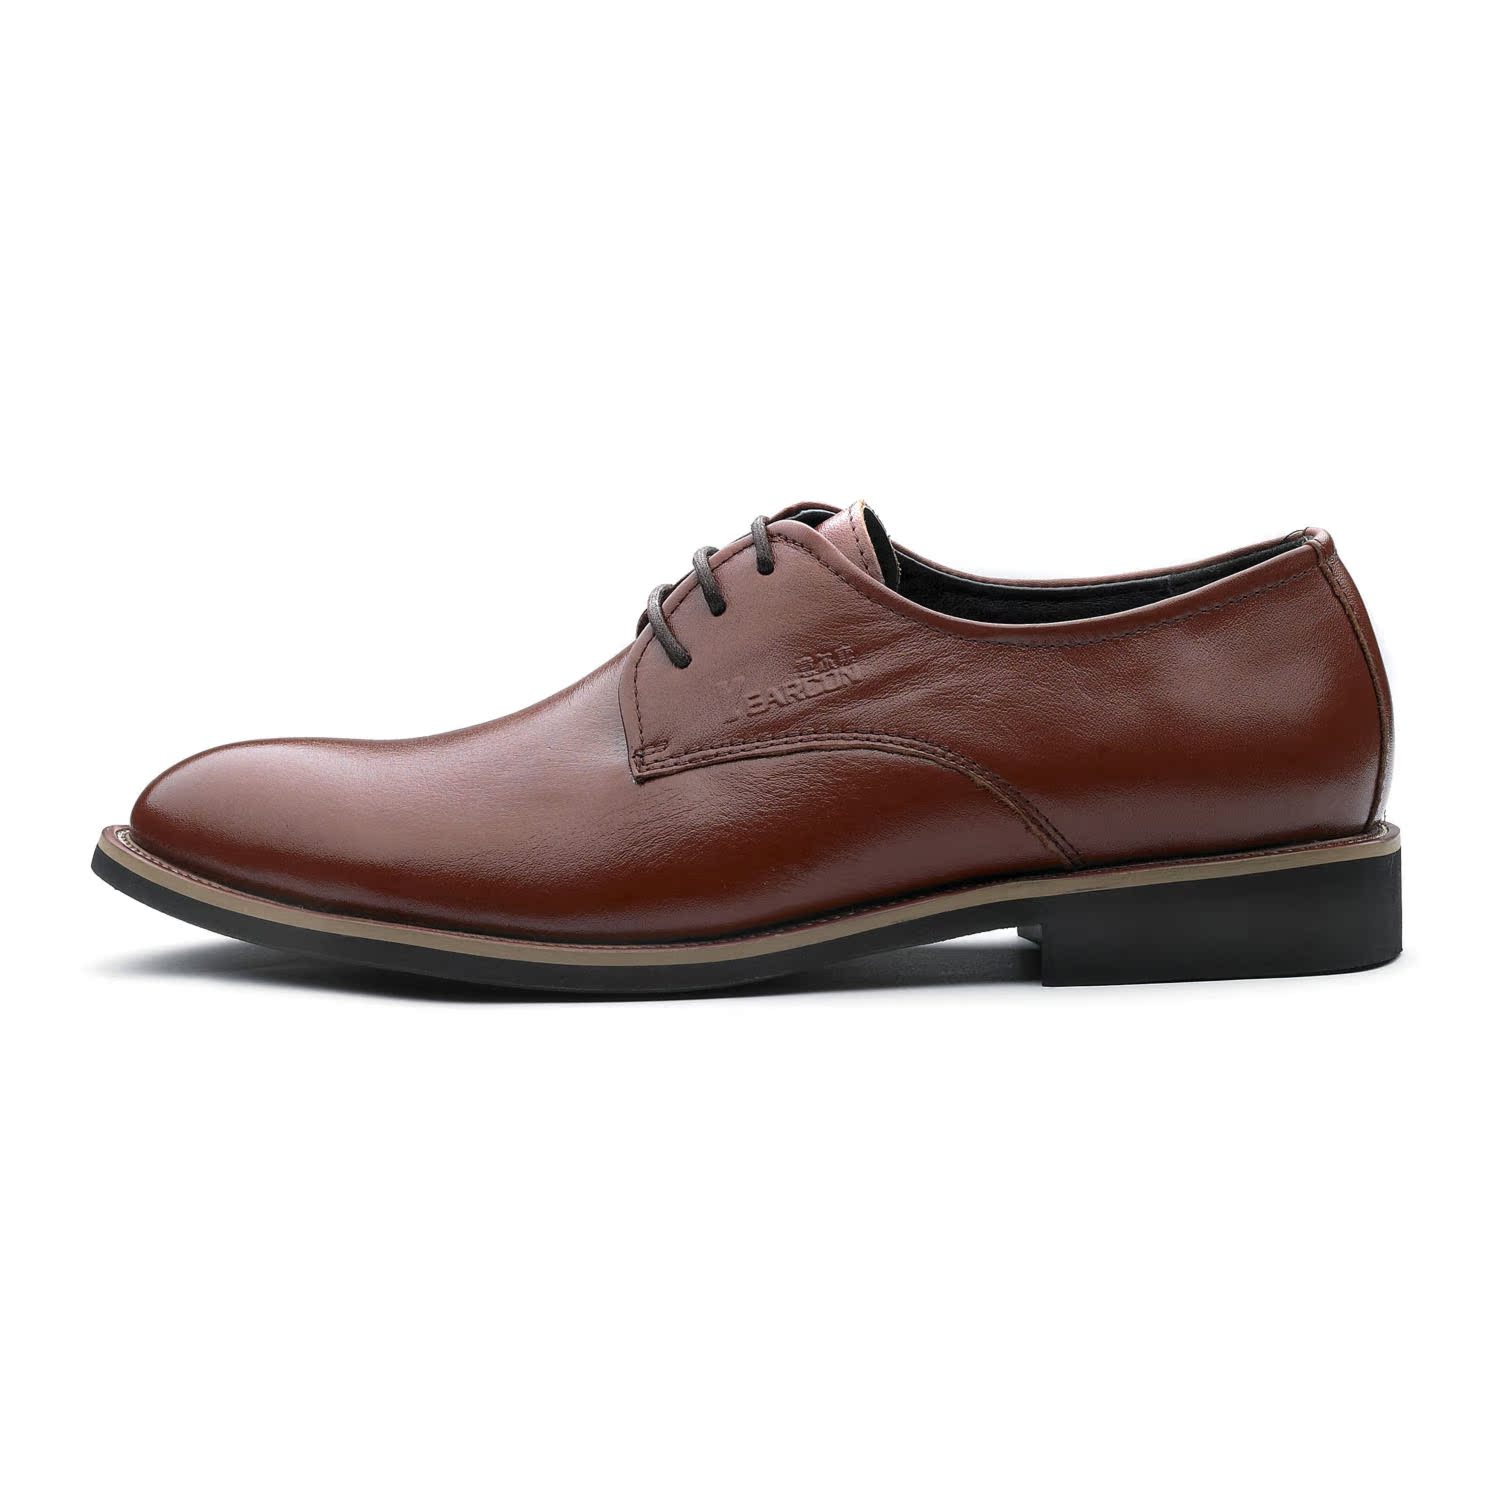 Men's leather shoes, the European version of Er Kang genuine business ...